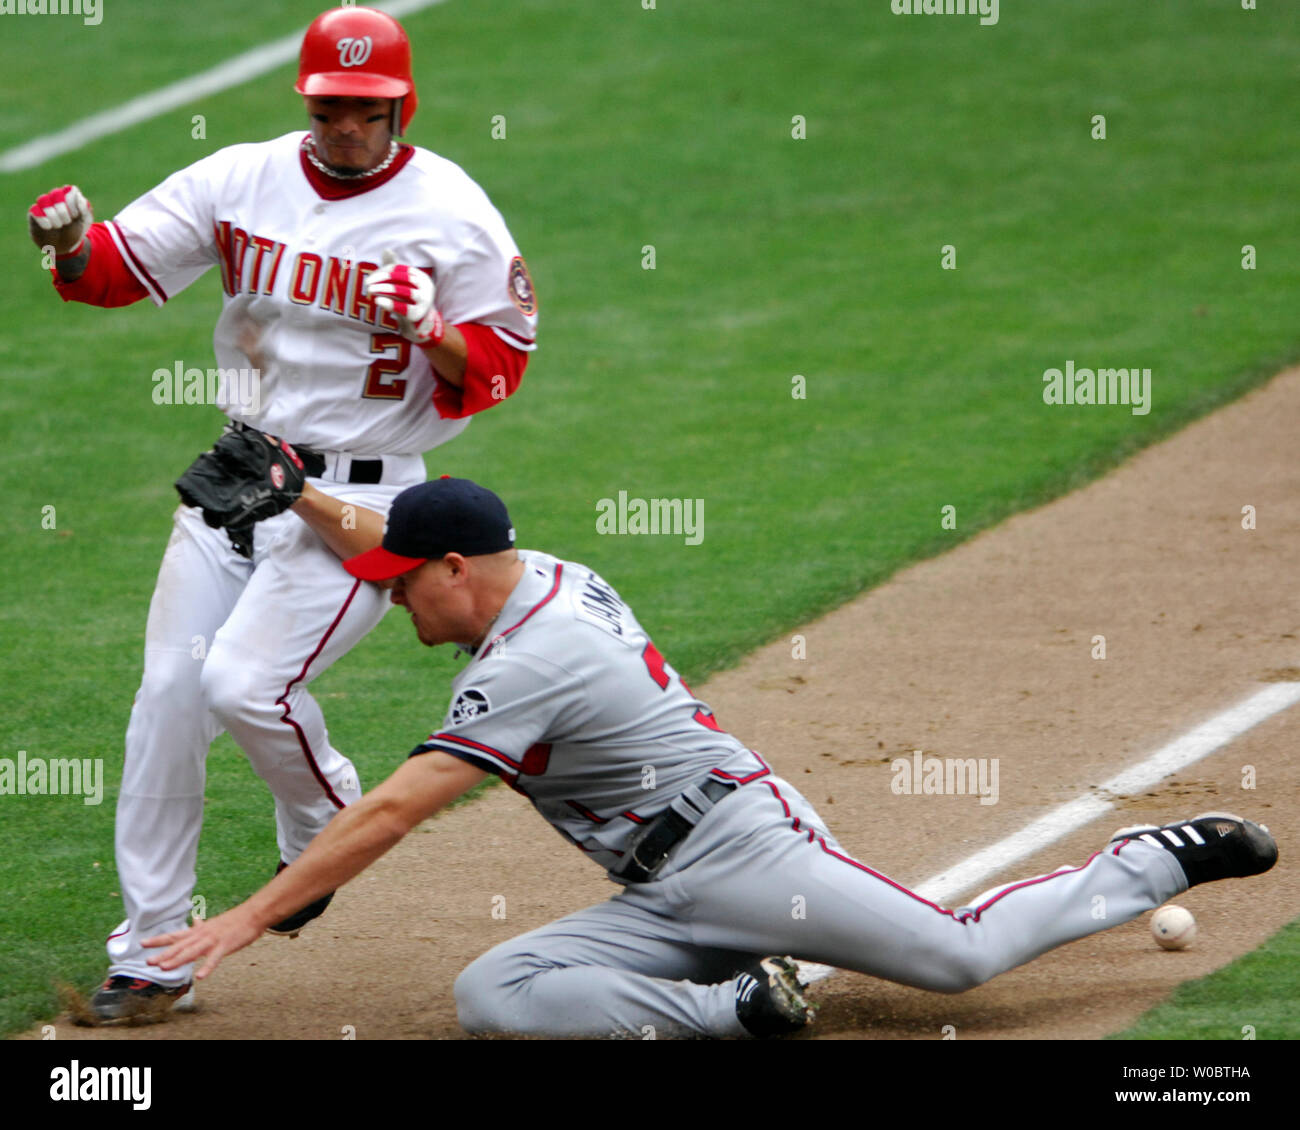 Washington Nationals shortstop Felipe Lopez (2) scores on a bases loaded single by Washington Nationals right fielder Austin Kearns as Atlanta Braves pitcher Chuck James (R) fails to handle the ball in the fifth inning at RFK Stadium in Washington on May 17, 2007.  The Nationals defeated the Braves 4-3.  (UPI Photo/Mark Goldman) Stock Photo